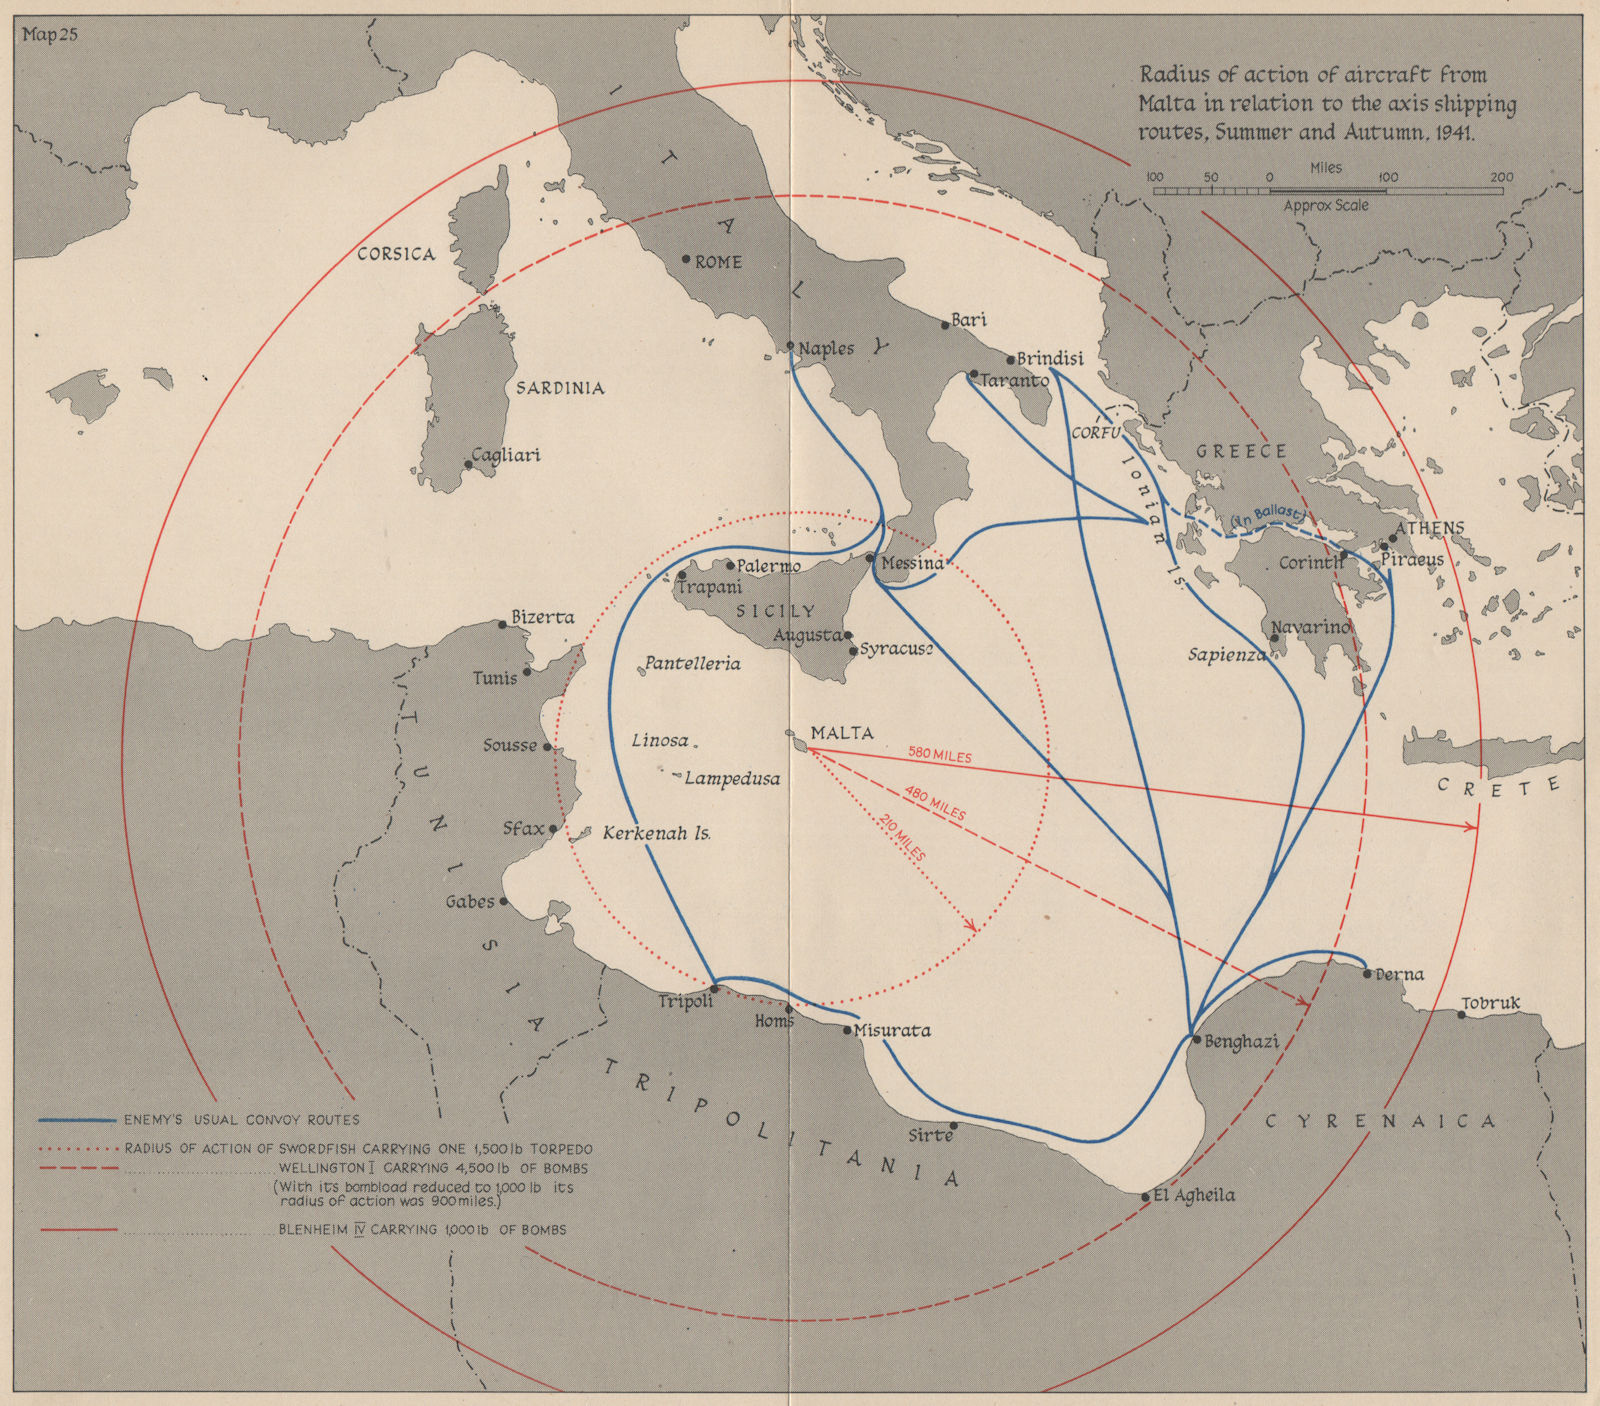 WW2 MALTA 1941. Range of aircraft from Malta. Axis shipping routes 1956 map